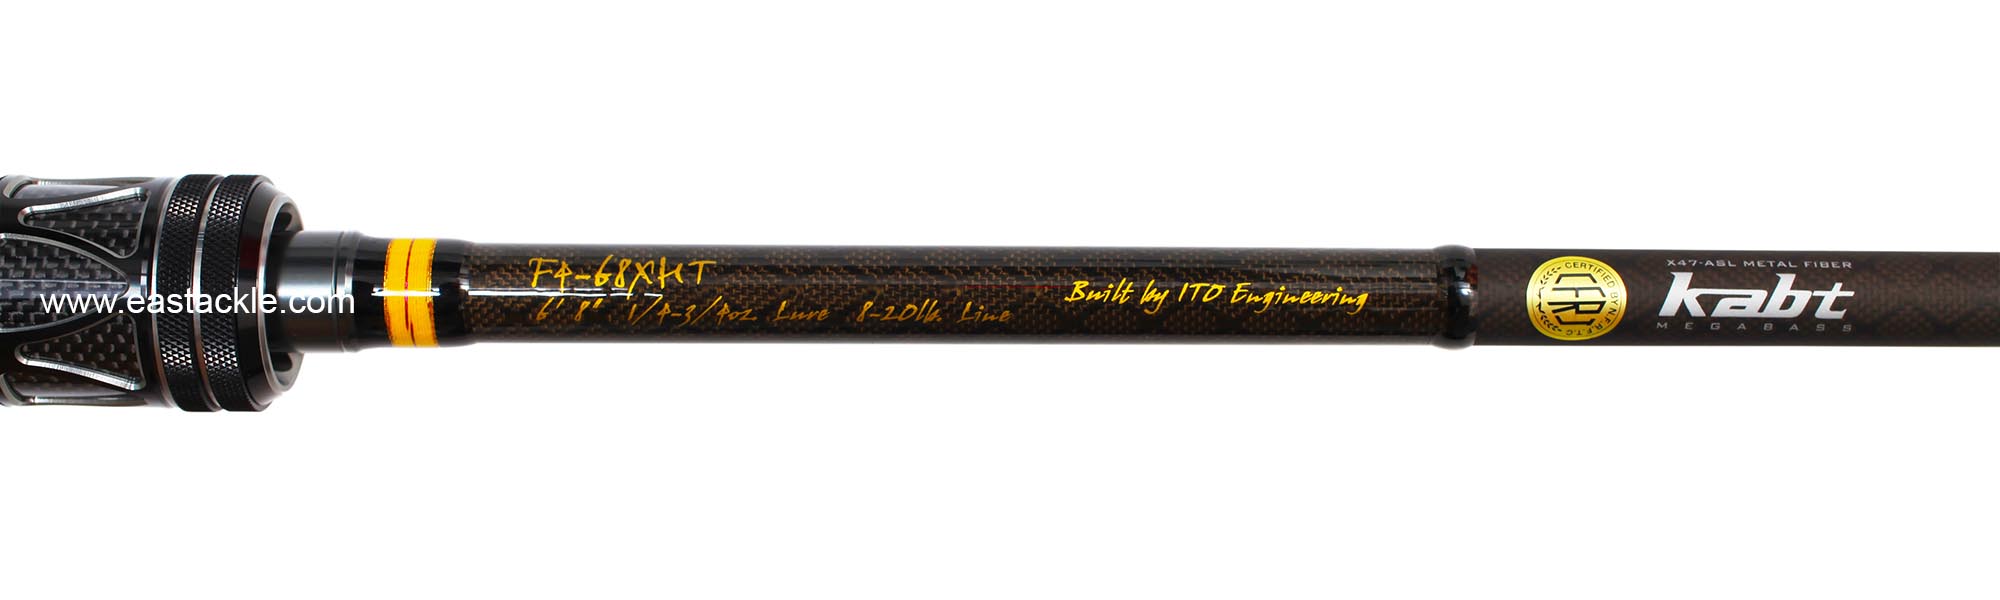 Megabass - Heritage F4-68XHT - Bait Casting Rod - Fore Grip Locking Nut and Blank Specifications (Under View) | Eastackle